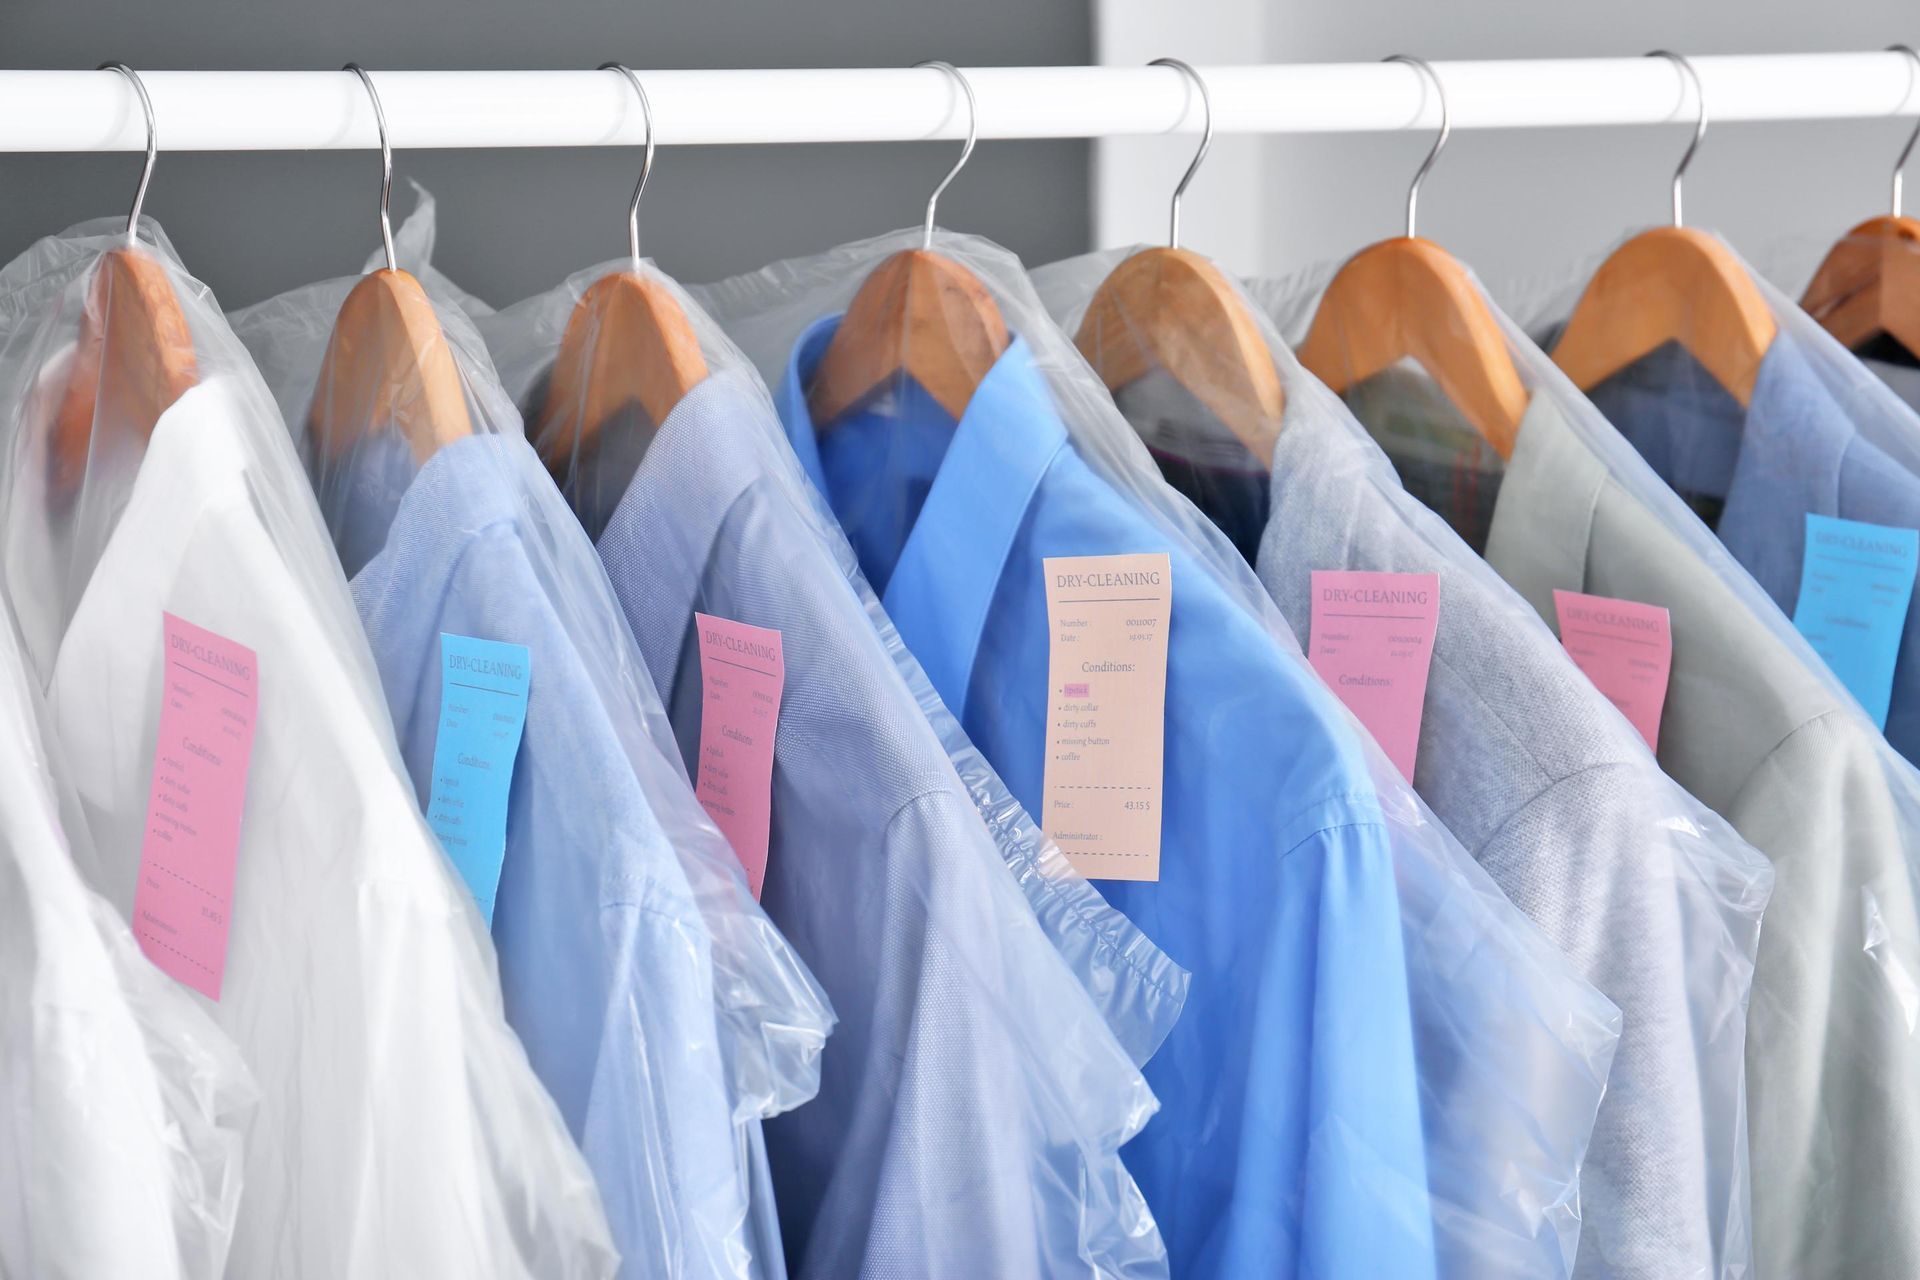 a row of shirts wrapped in plastic are hanging on a rack